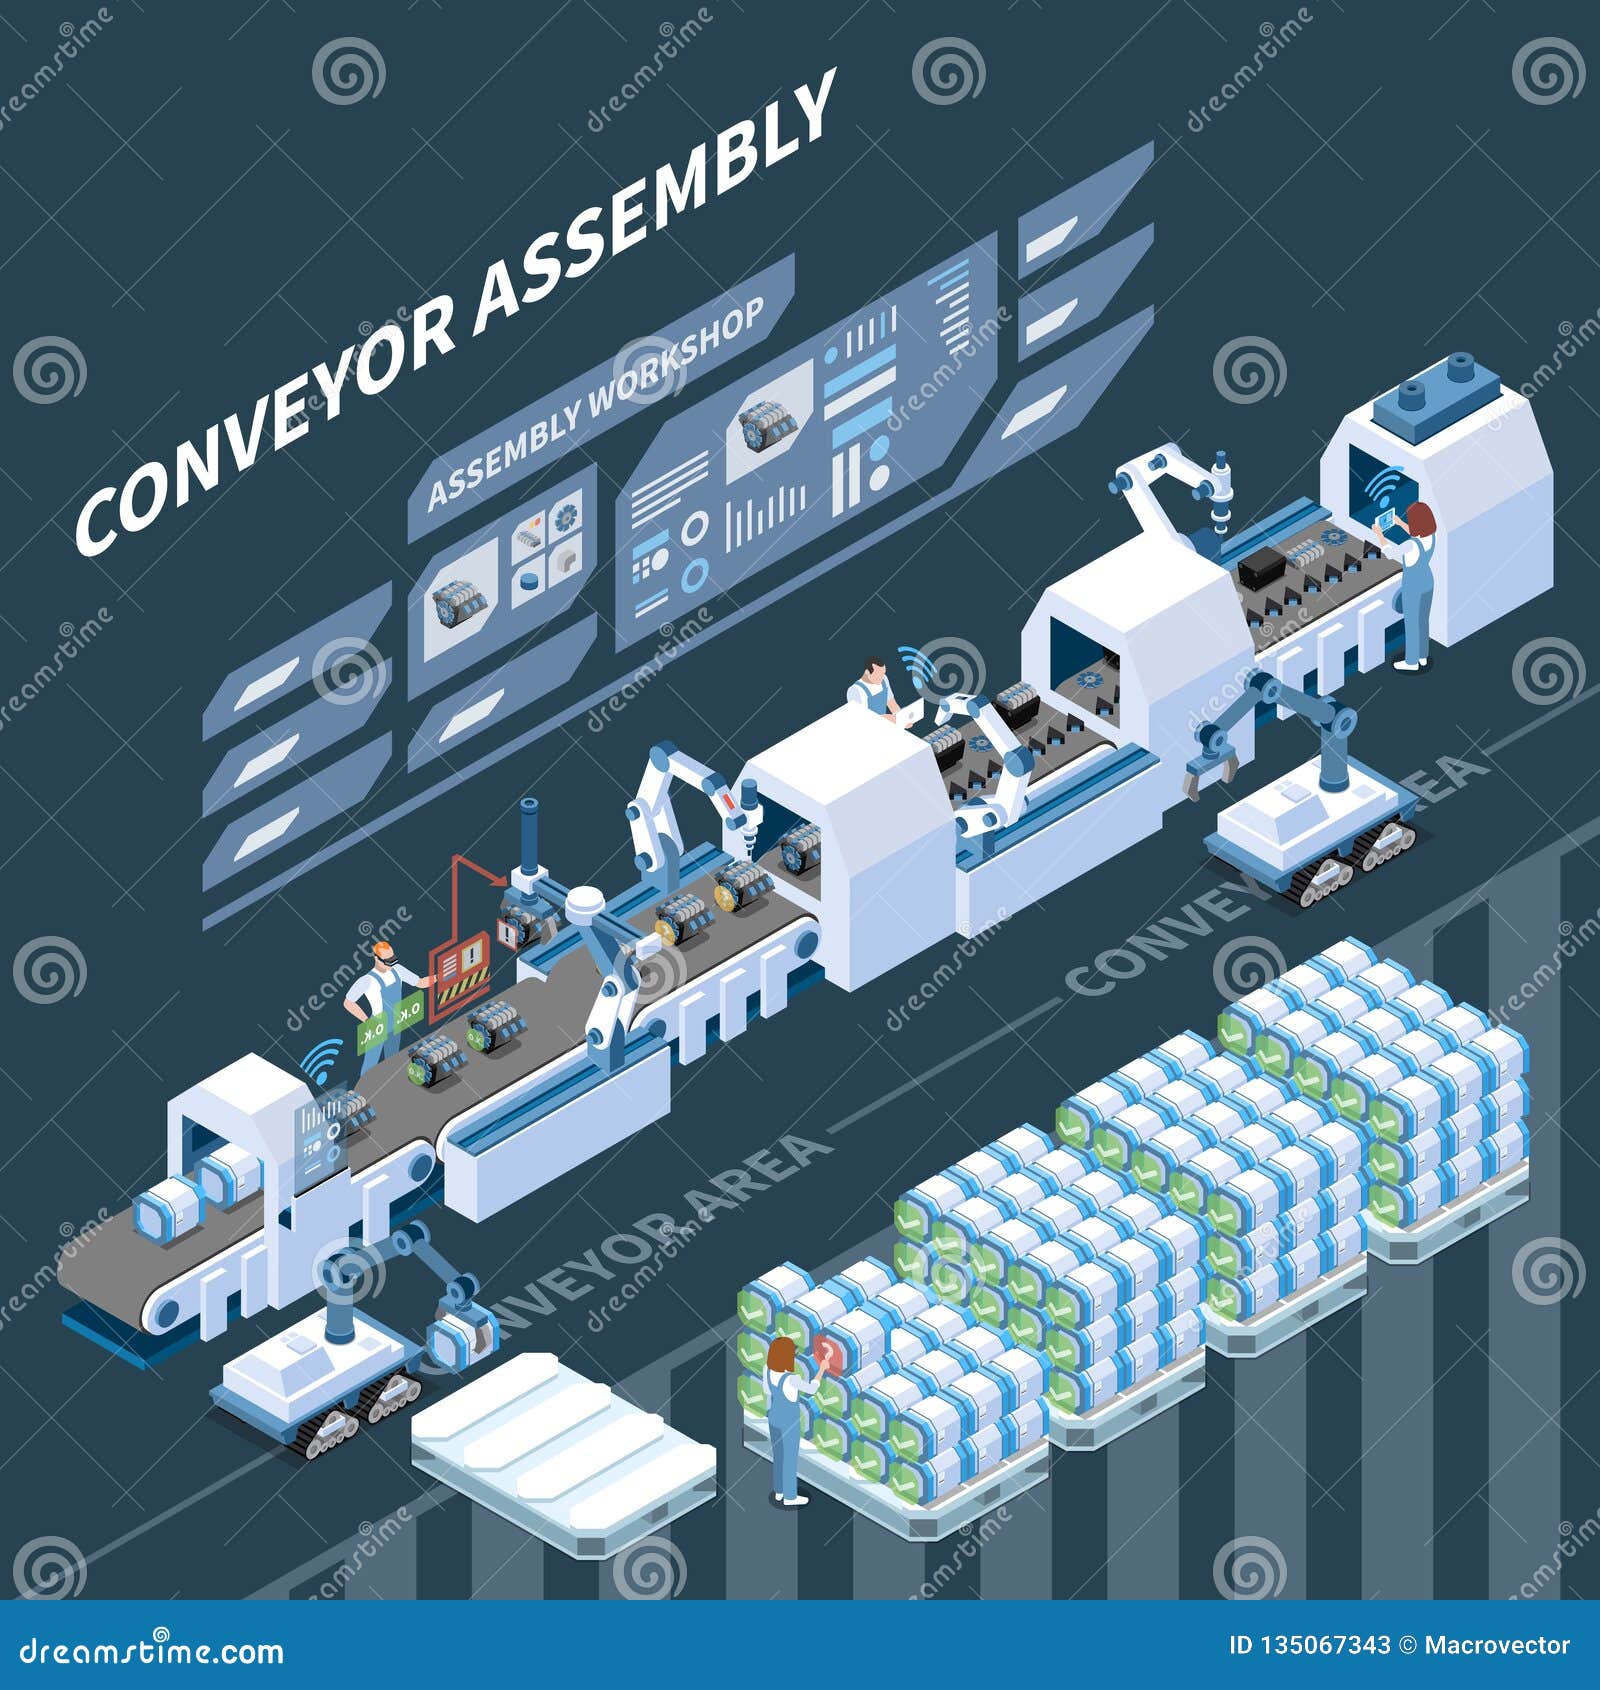 smart assembly line isometric composition